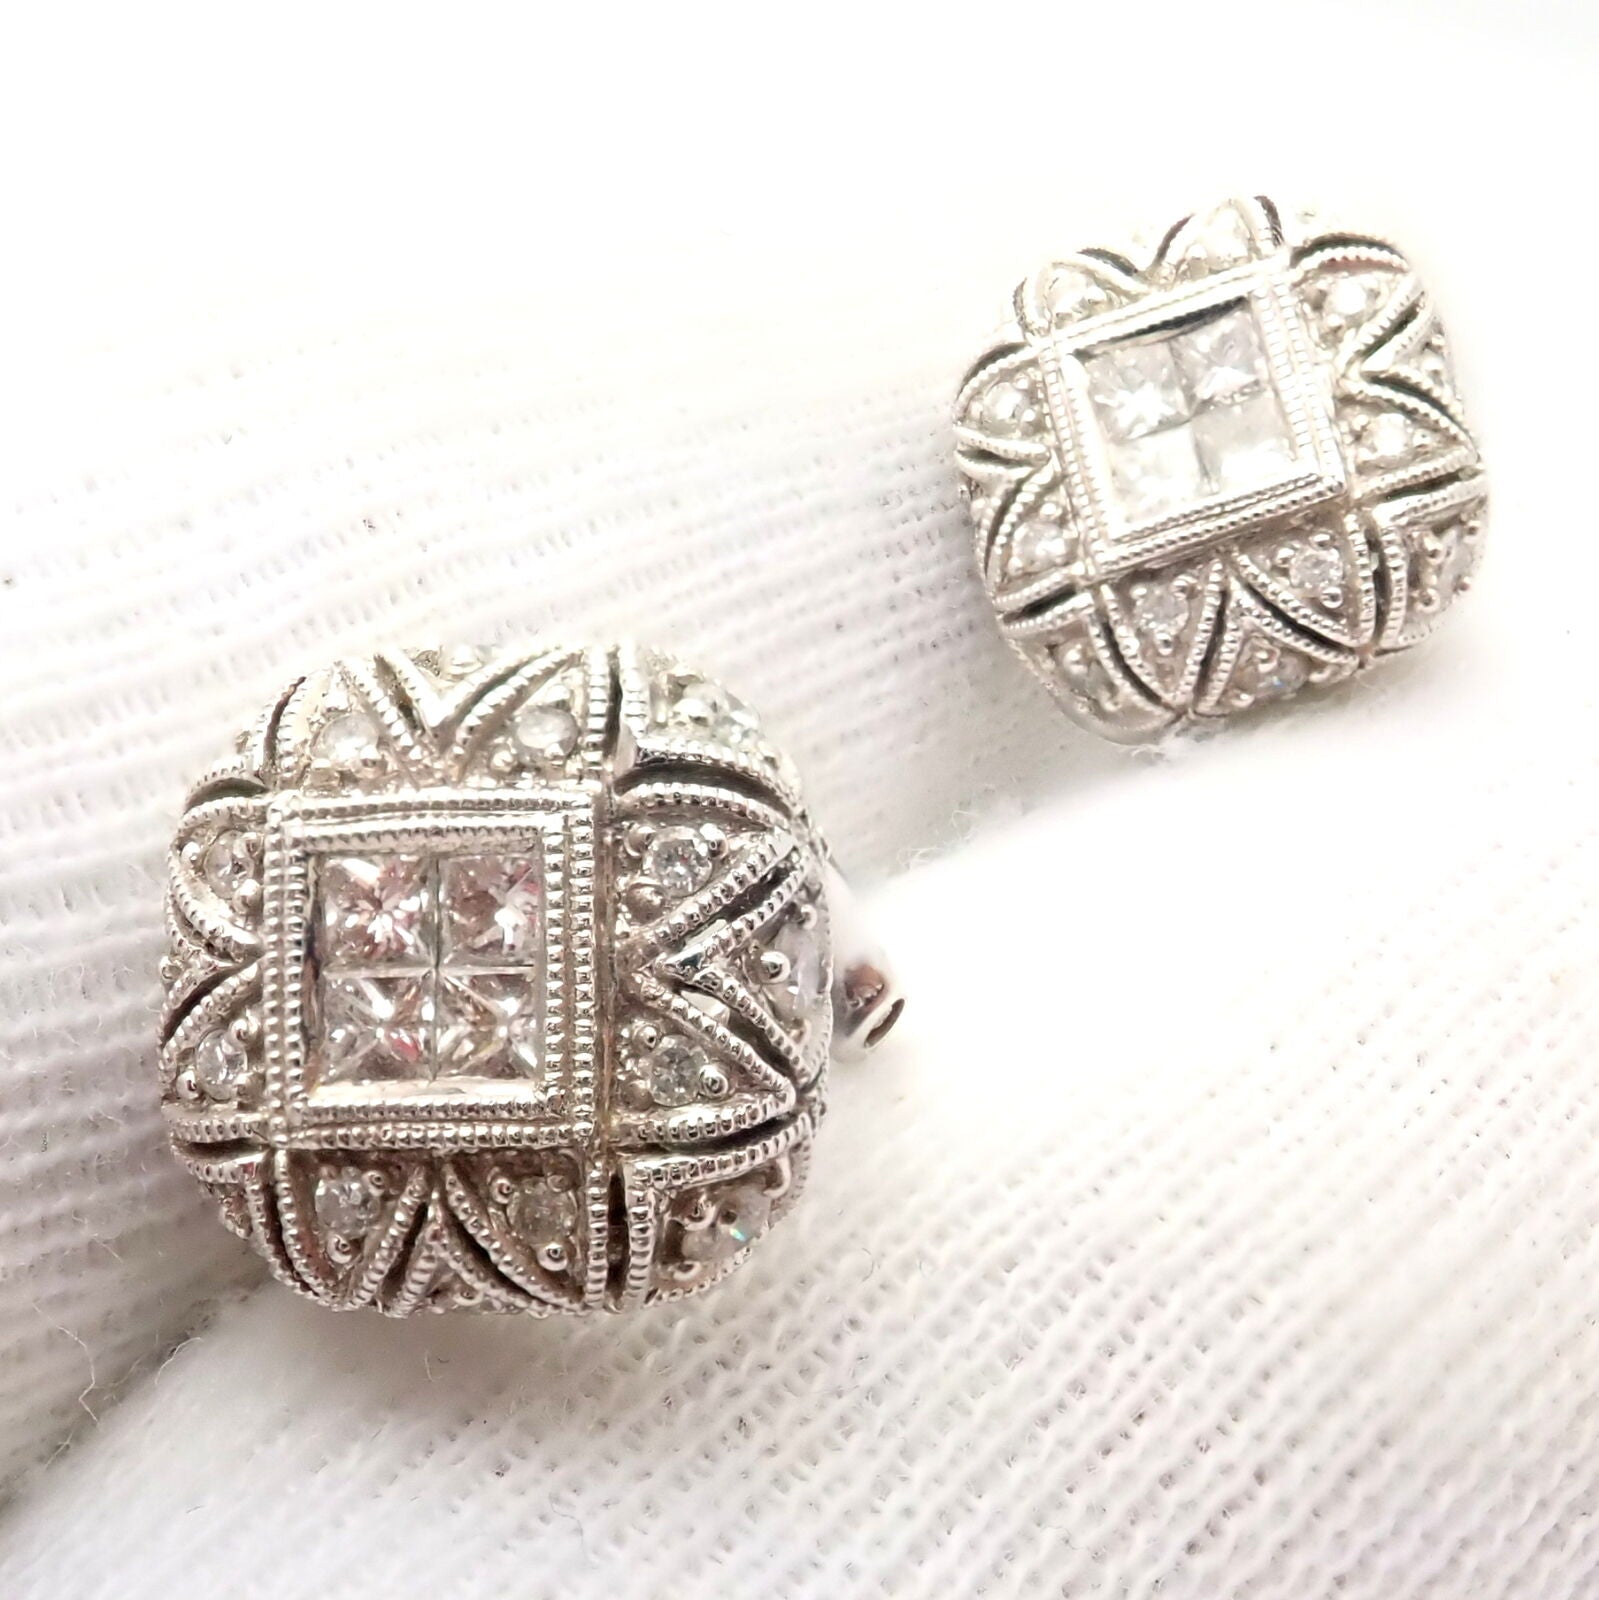 LeVian Jewelry & Watches:Fine Jewelry:Earrings Authentic! LeVian 18k White Gold Diamond Pillow Earrings